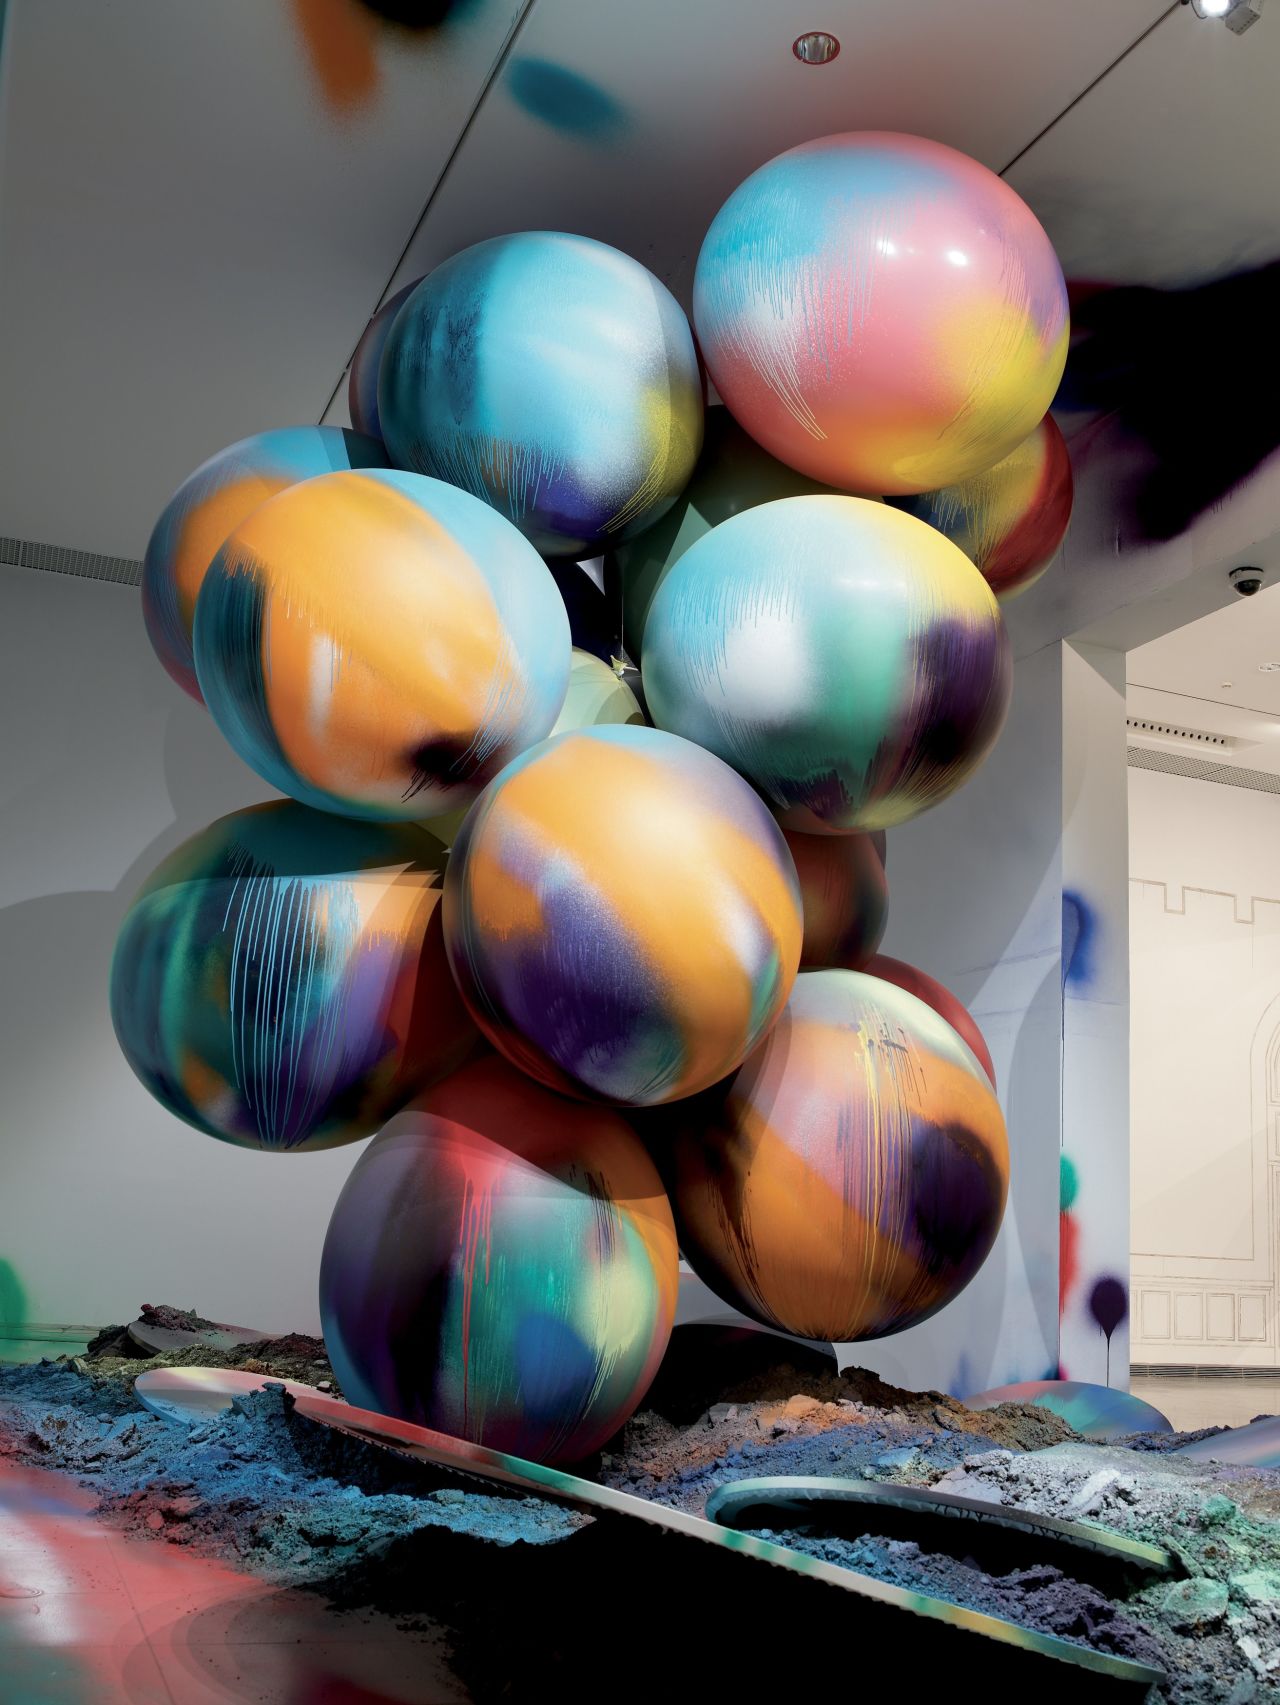 <em>Pigments for Plants and Balloons, Katharina Grosse, 2008</em><br /><br />The sheer pace of transformation is affecting the way we use space, from the public and cultural spheres to the digital realm. While artists take a more global approach, art institutions in cities around the world have been competing to put themselves on the map with large-scale commissions that make a bold statement.